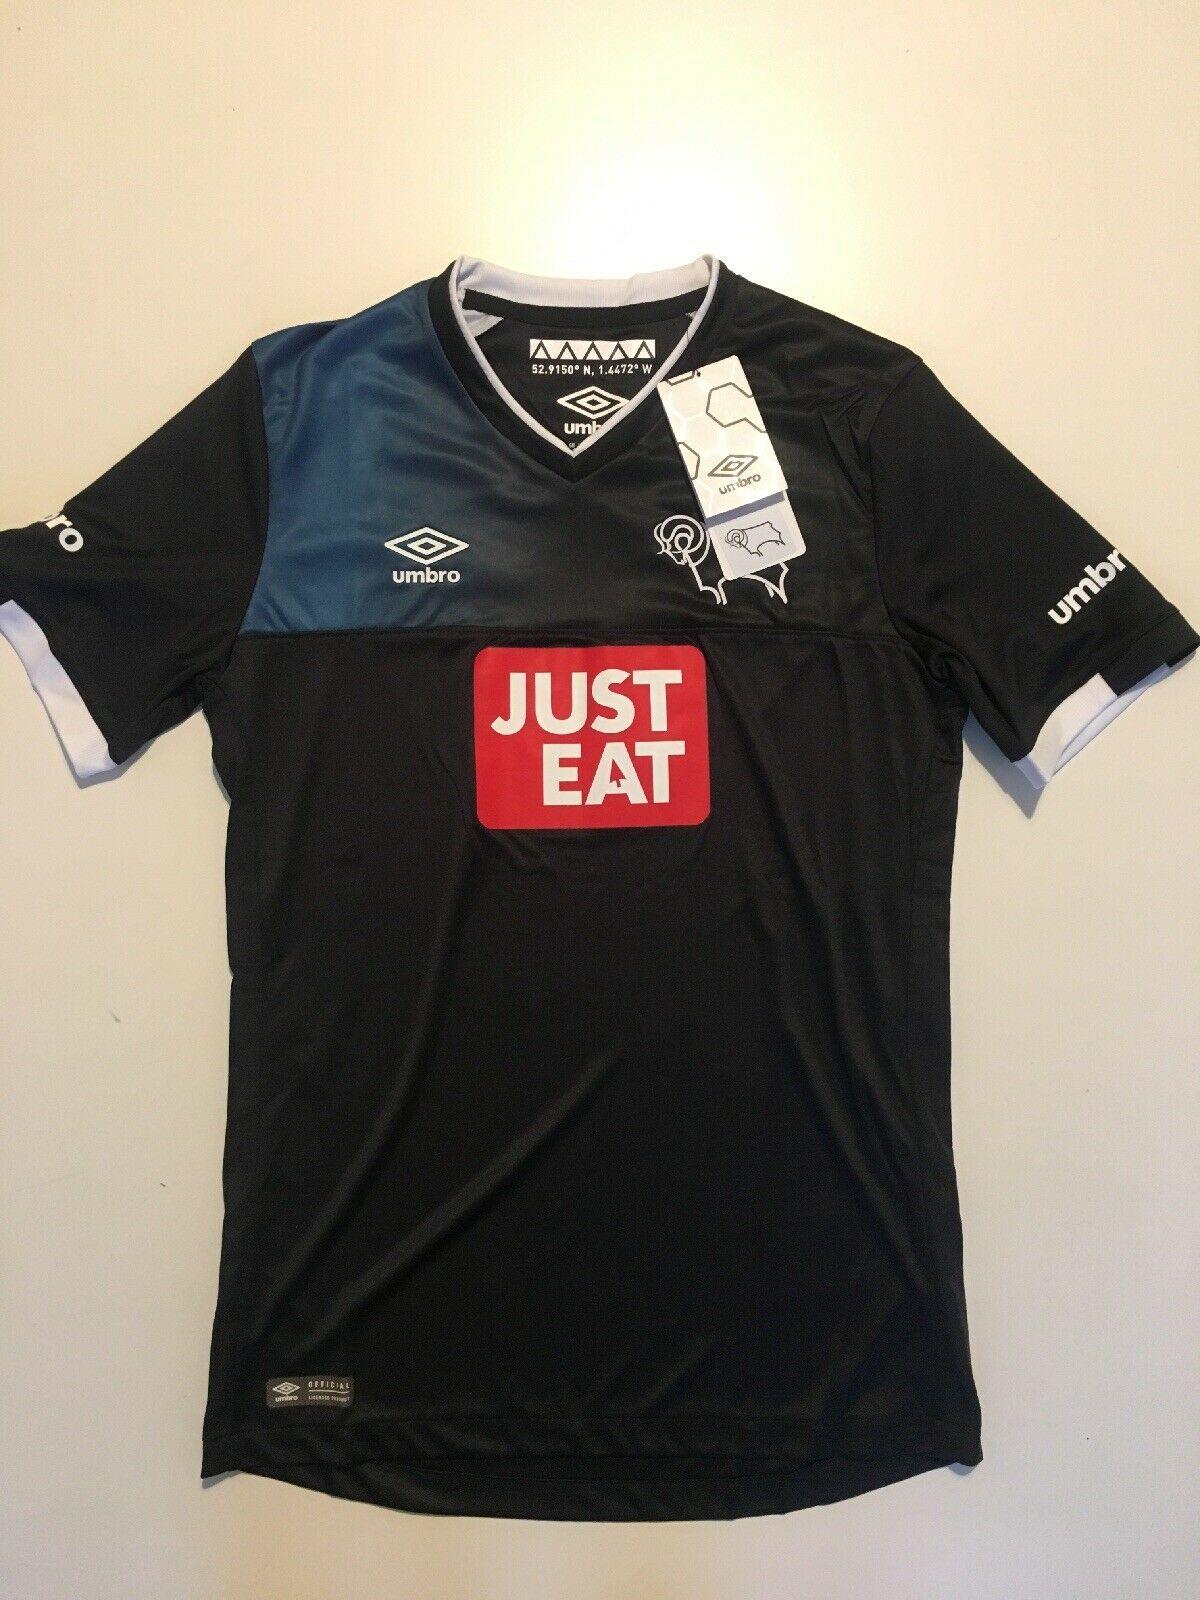 BNWT Derby County 2016/17 Home Football Shirt Size Adult Small 